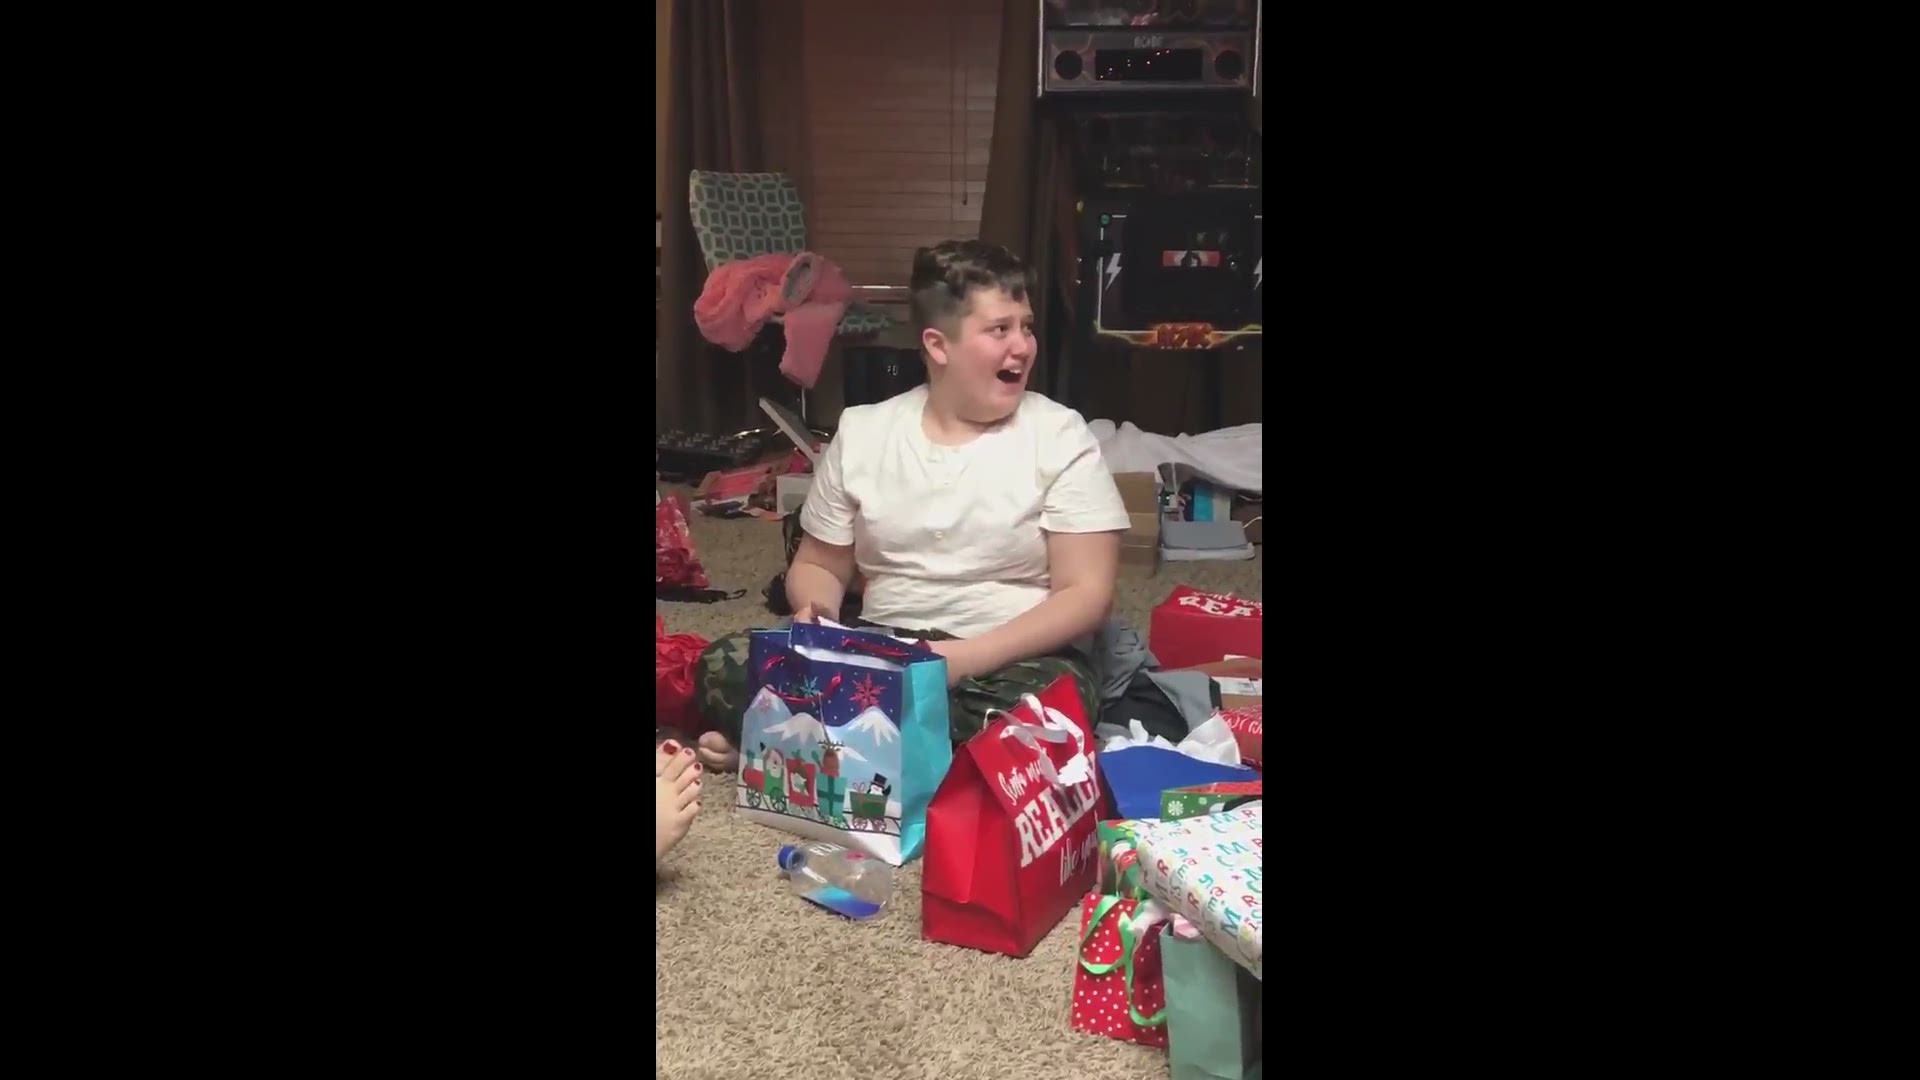 Jimbo Schaffer posted this video of his son crying after he received tickets to UK's bowl game for Christmas to Twitter.